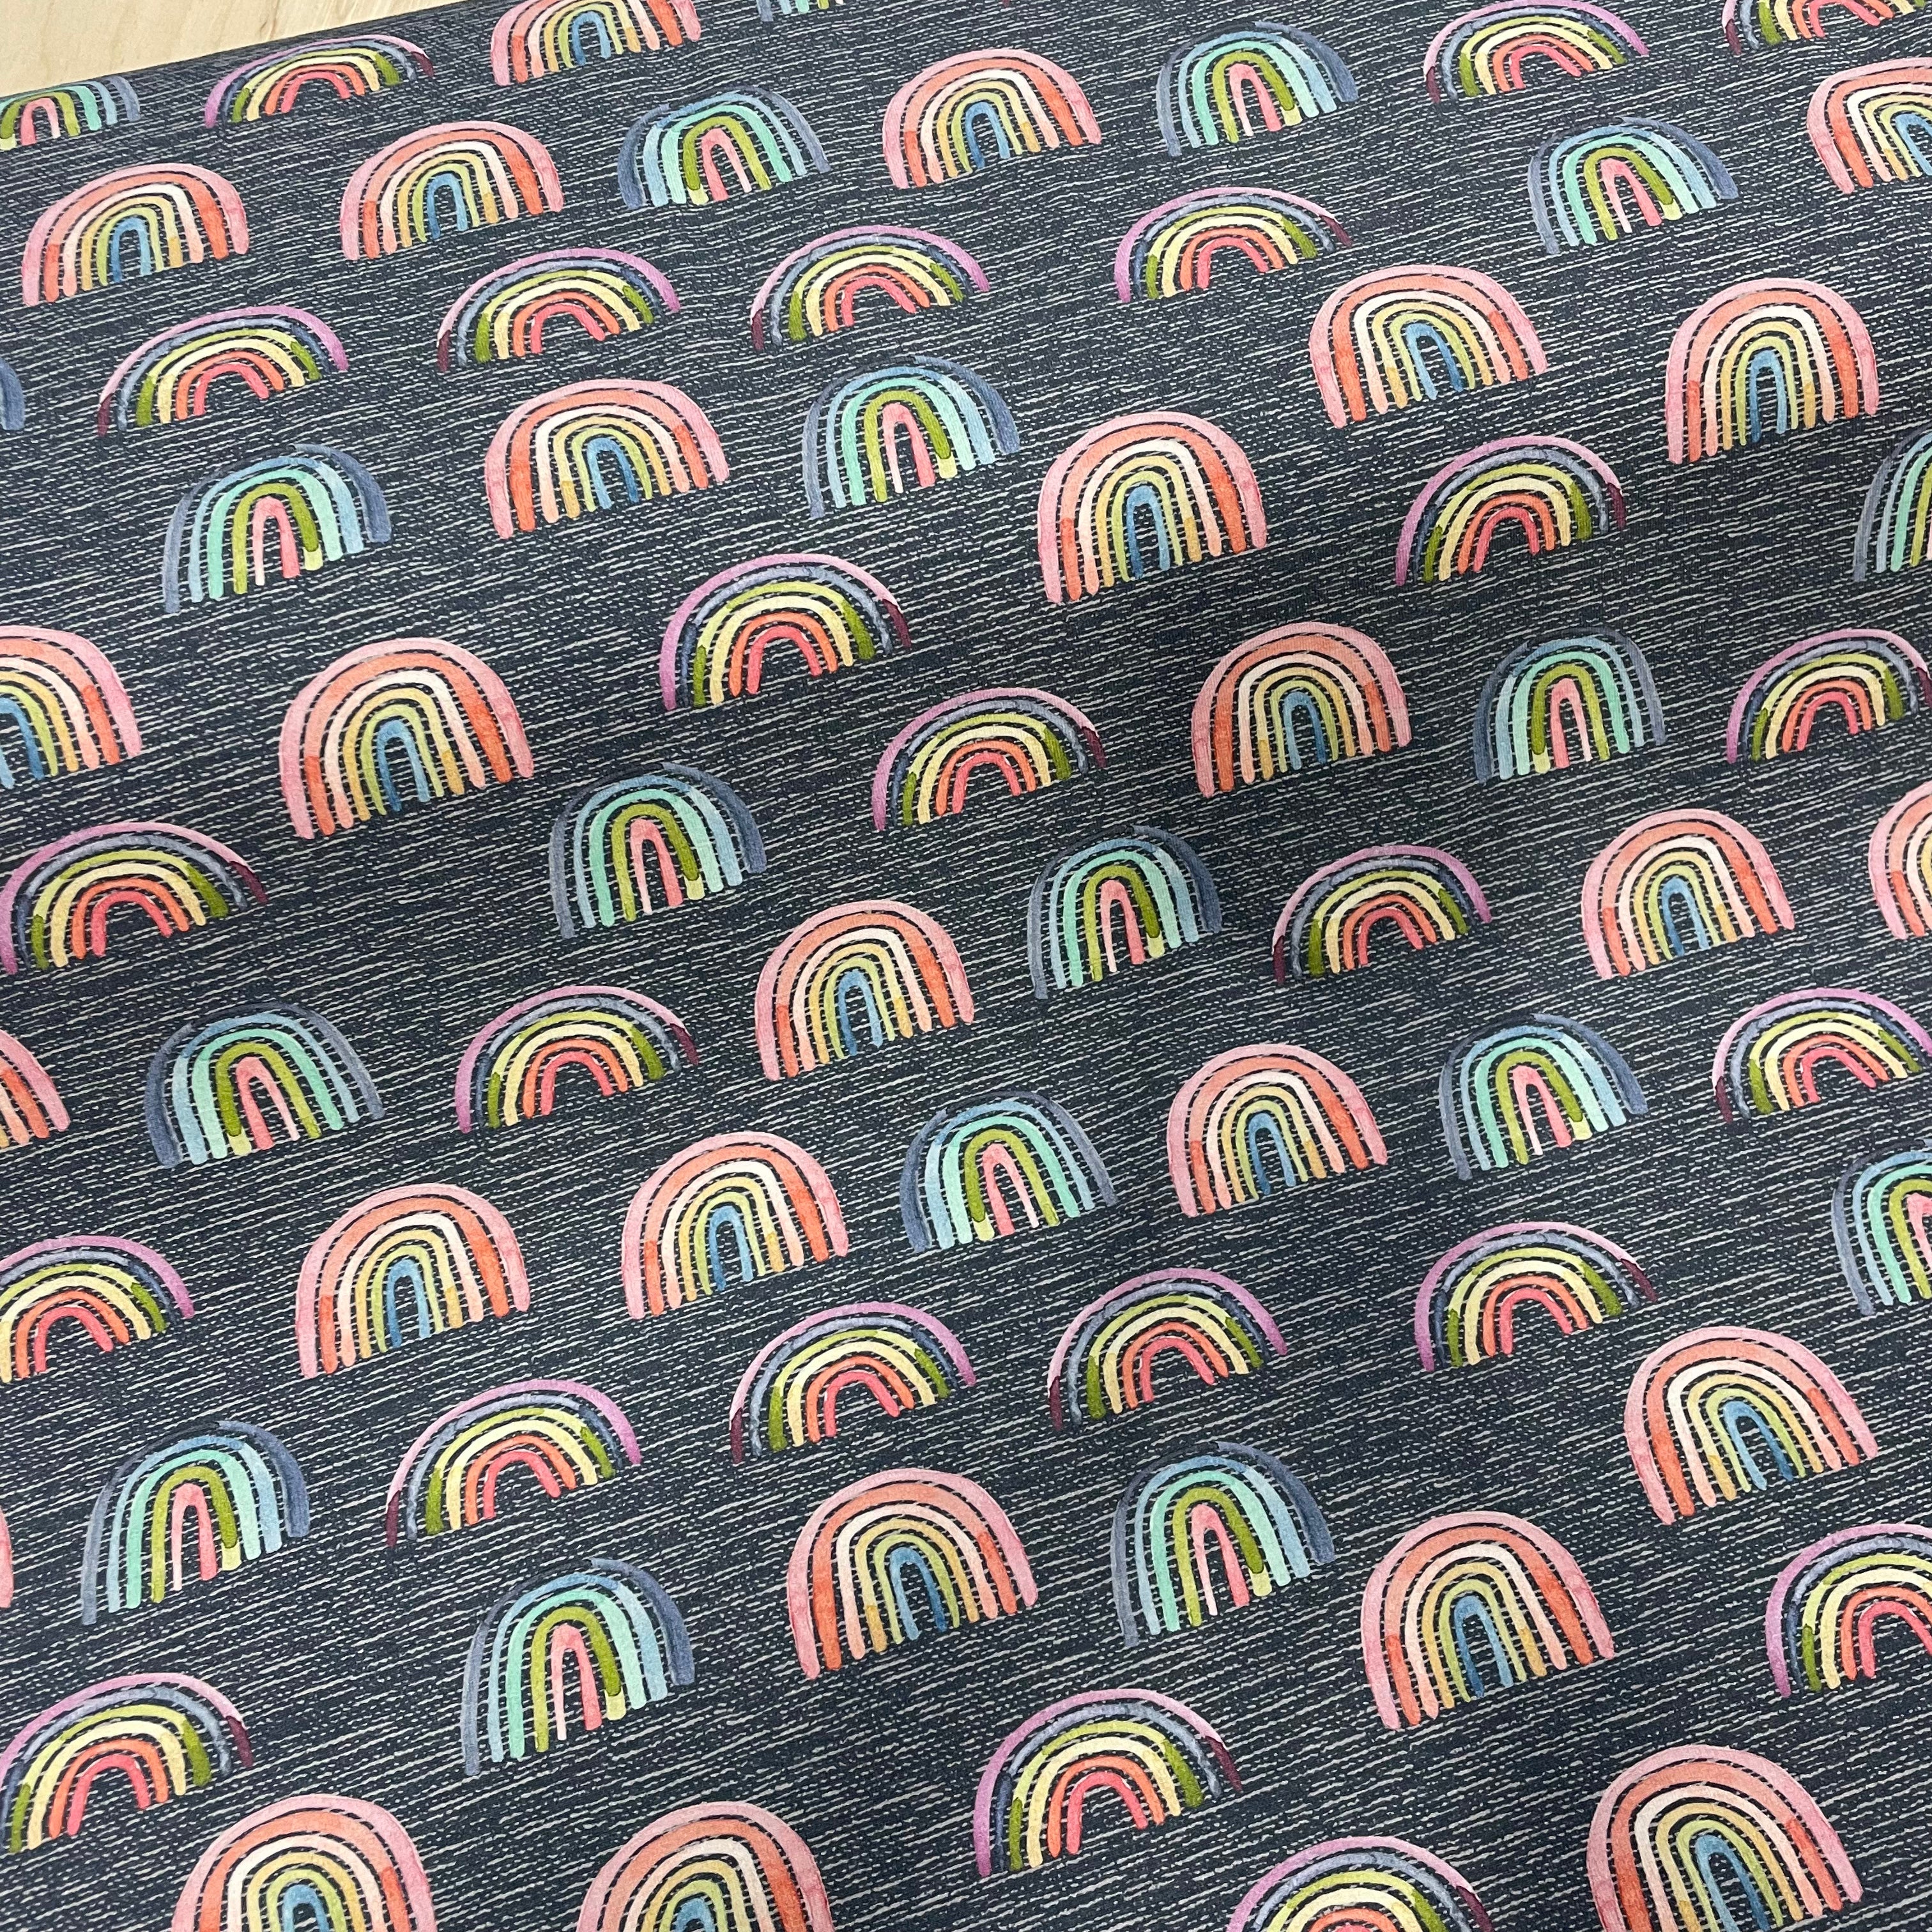 PRE ORDER Denim Rainbows Cotton Jersey Fabric - DUE IN STOCK EARLY JUNE